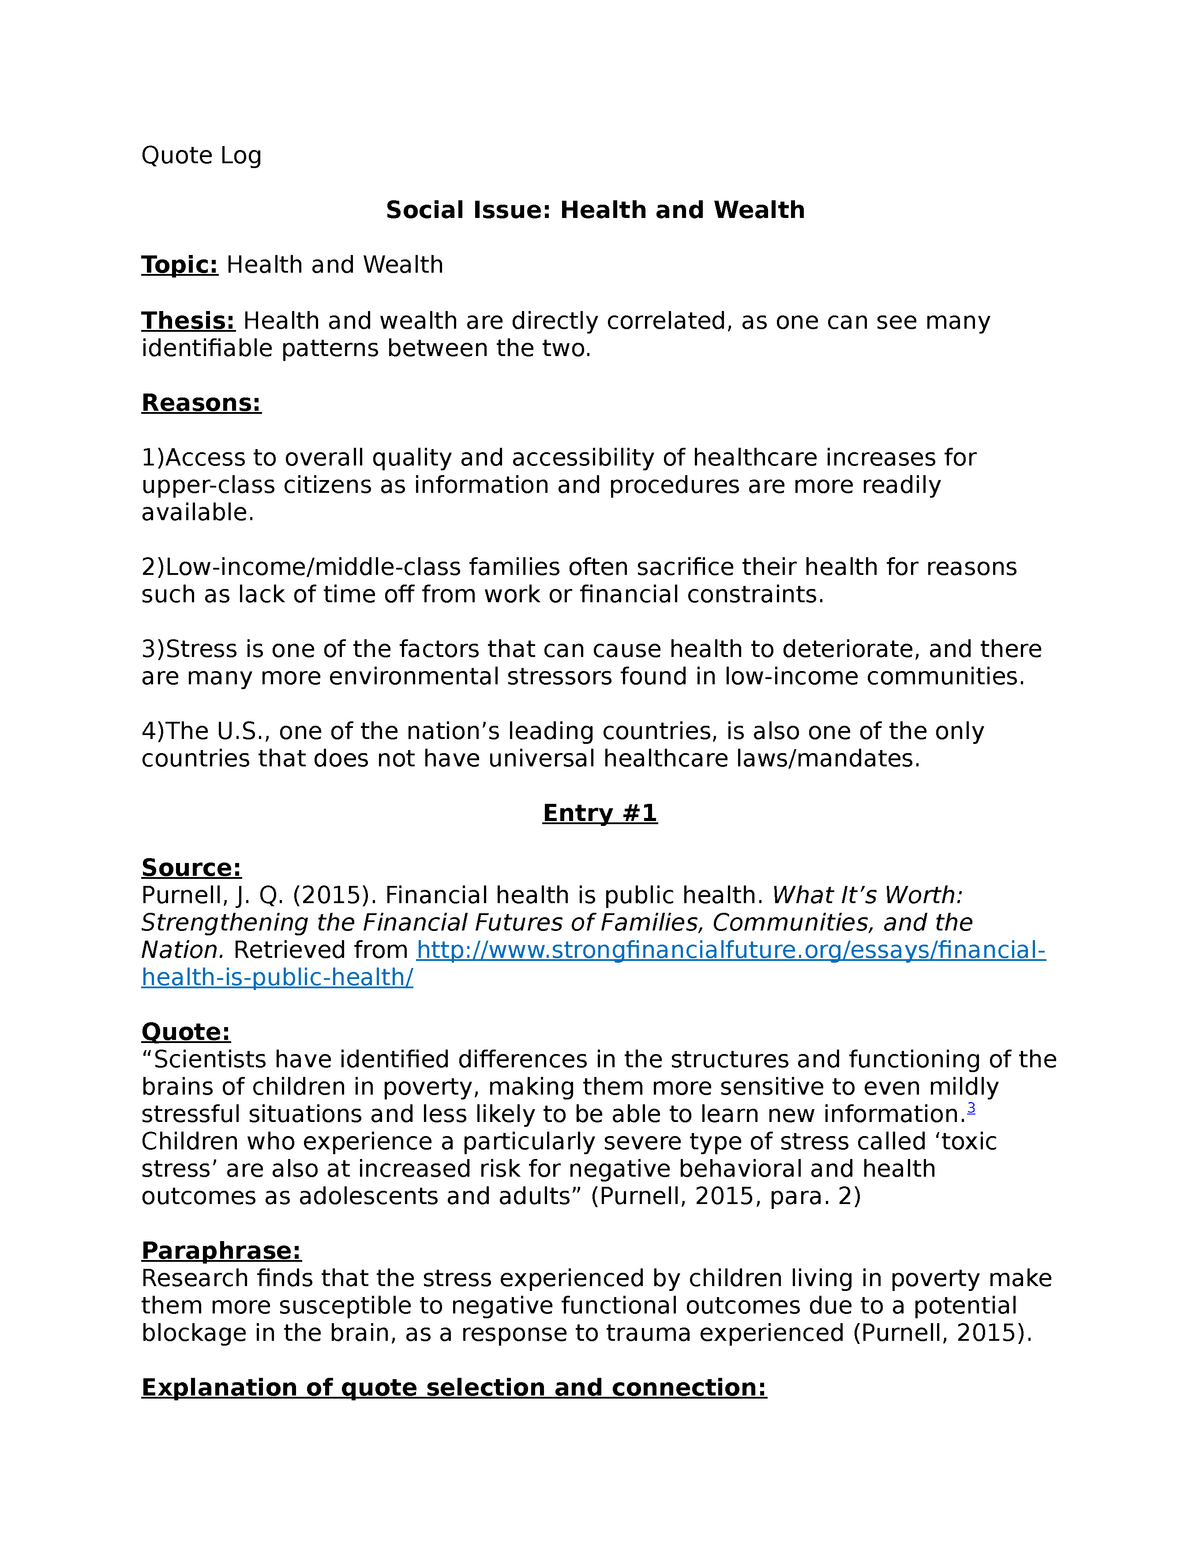 thesis statement for health and wealth